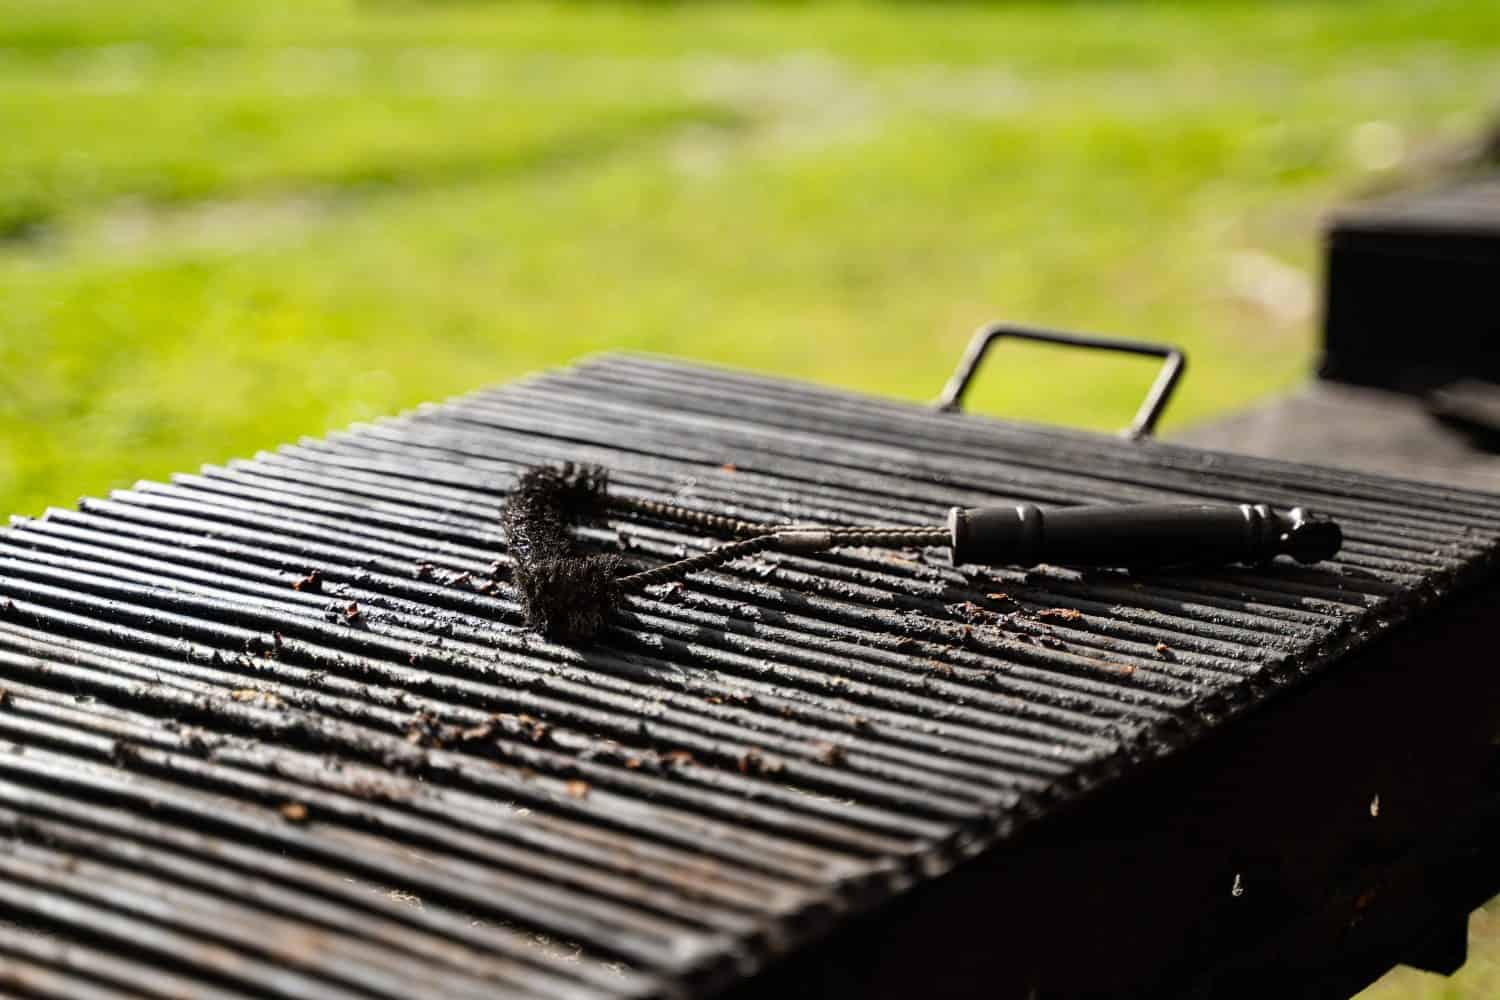 front view closeup of outdoor empty barbeque grill with black brush tool for cleaning on top in outdoor setting with green grass